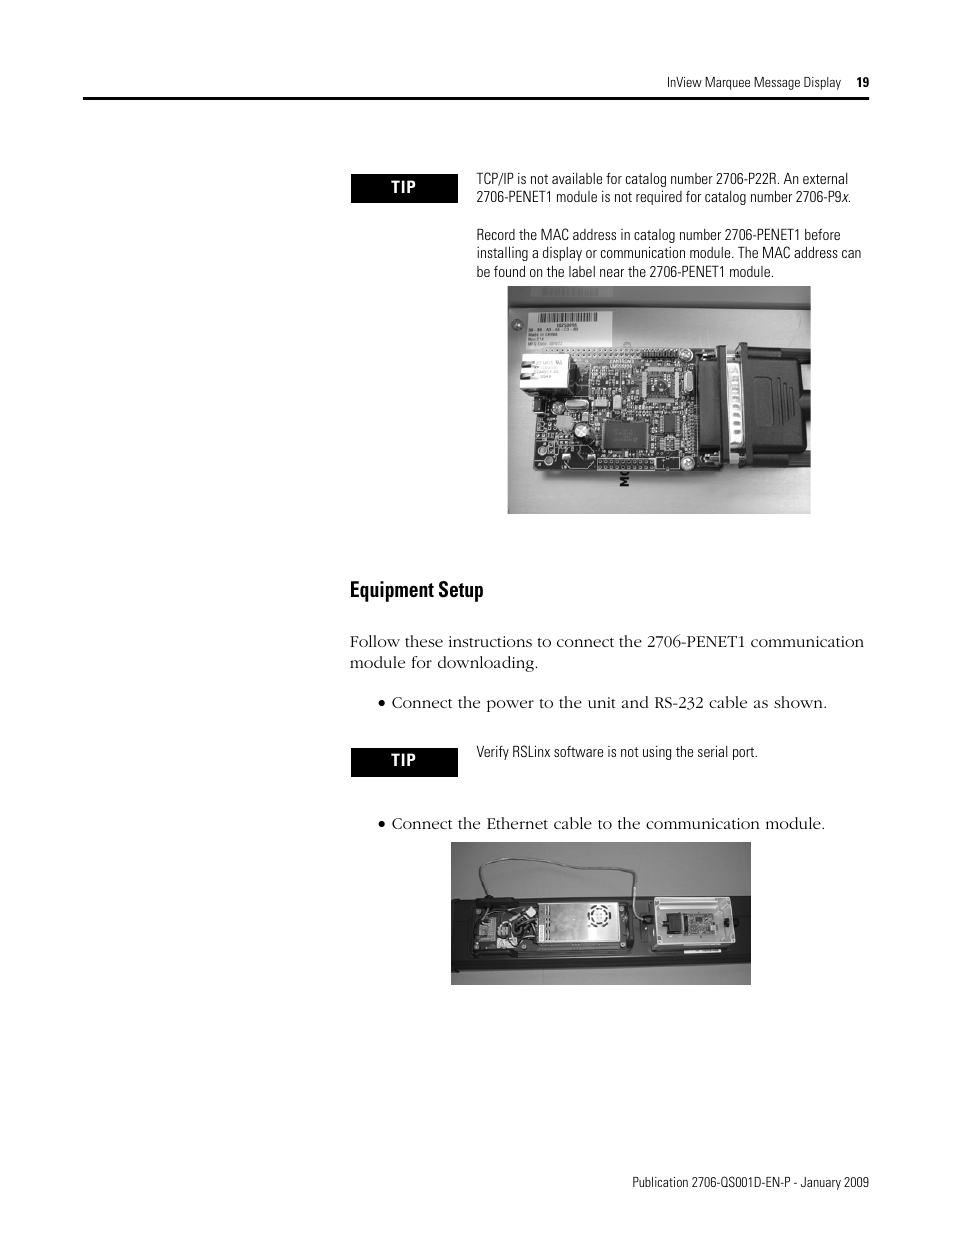 Equipment setup | Rockwell Automation 2706-P_P InView Quick Start User Manual | Page 19 / 24